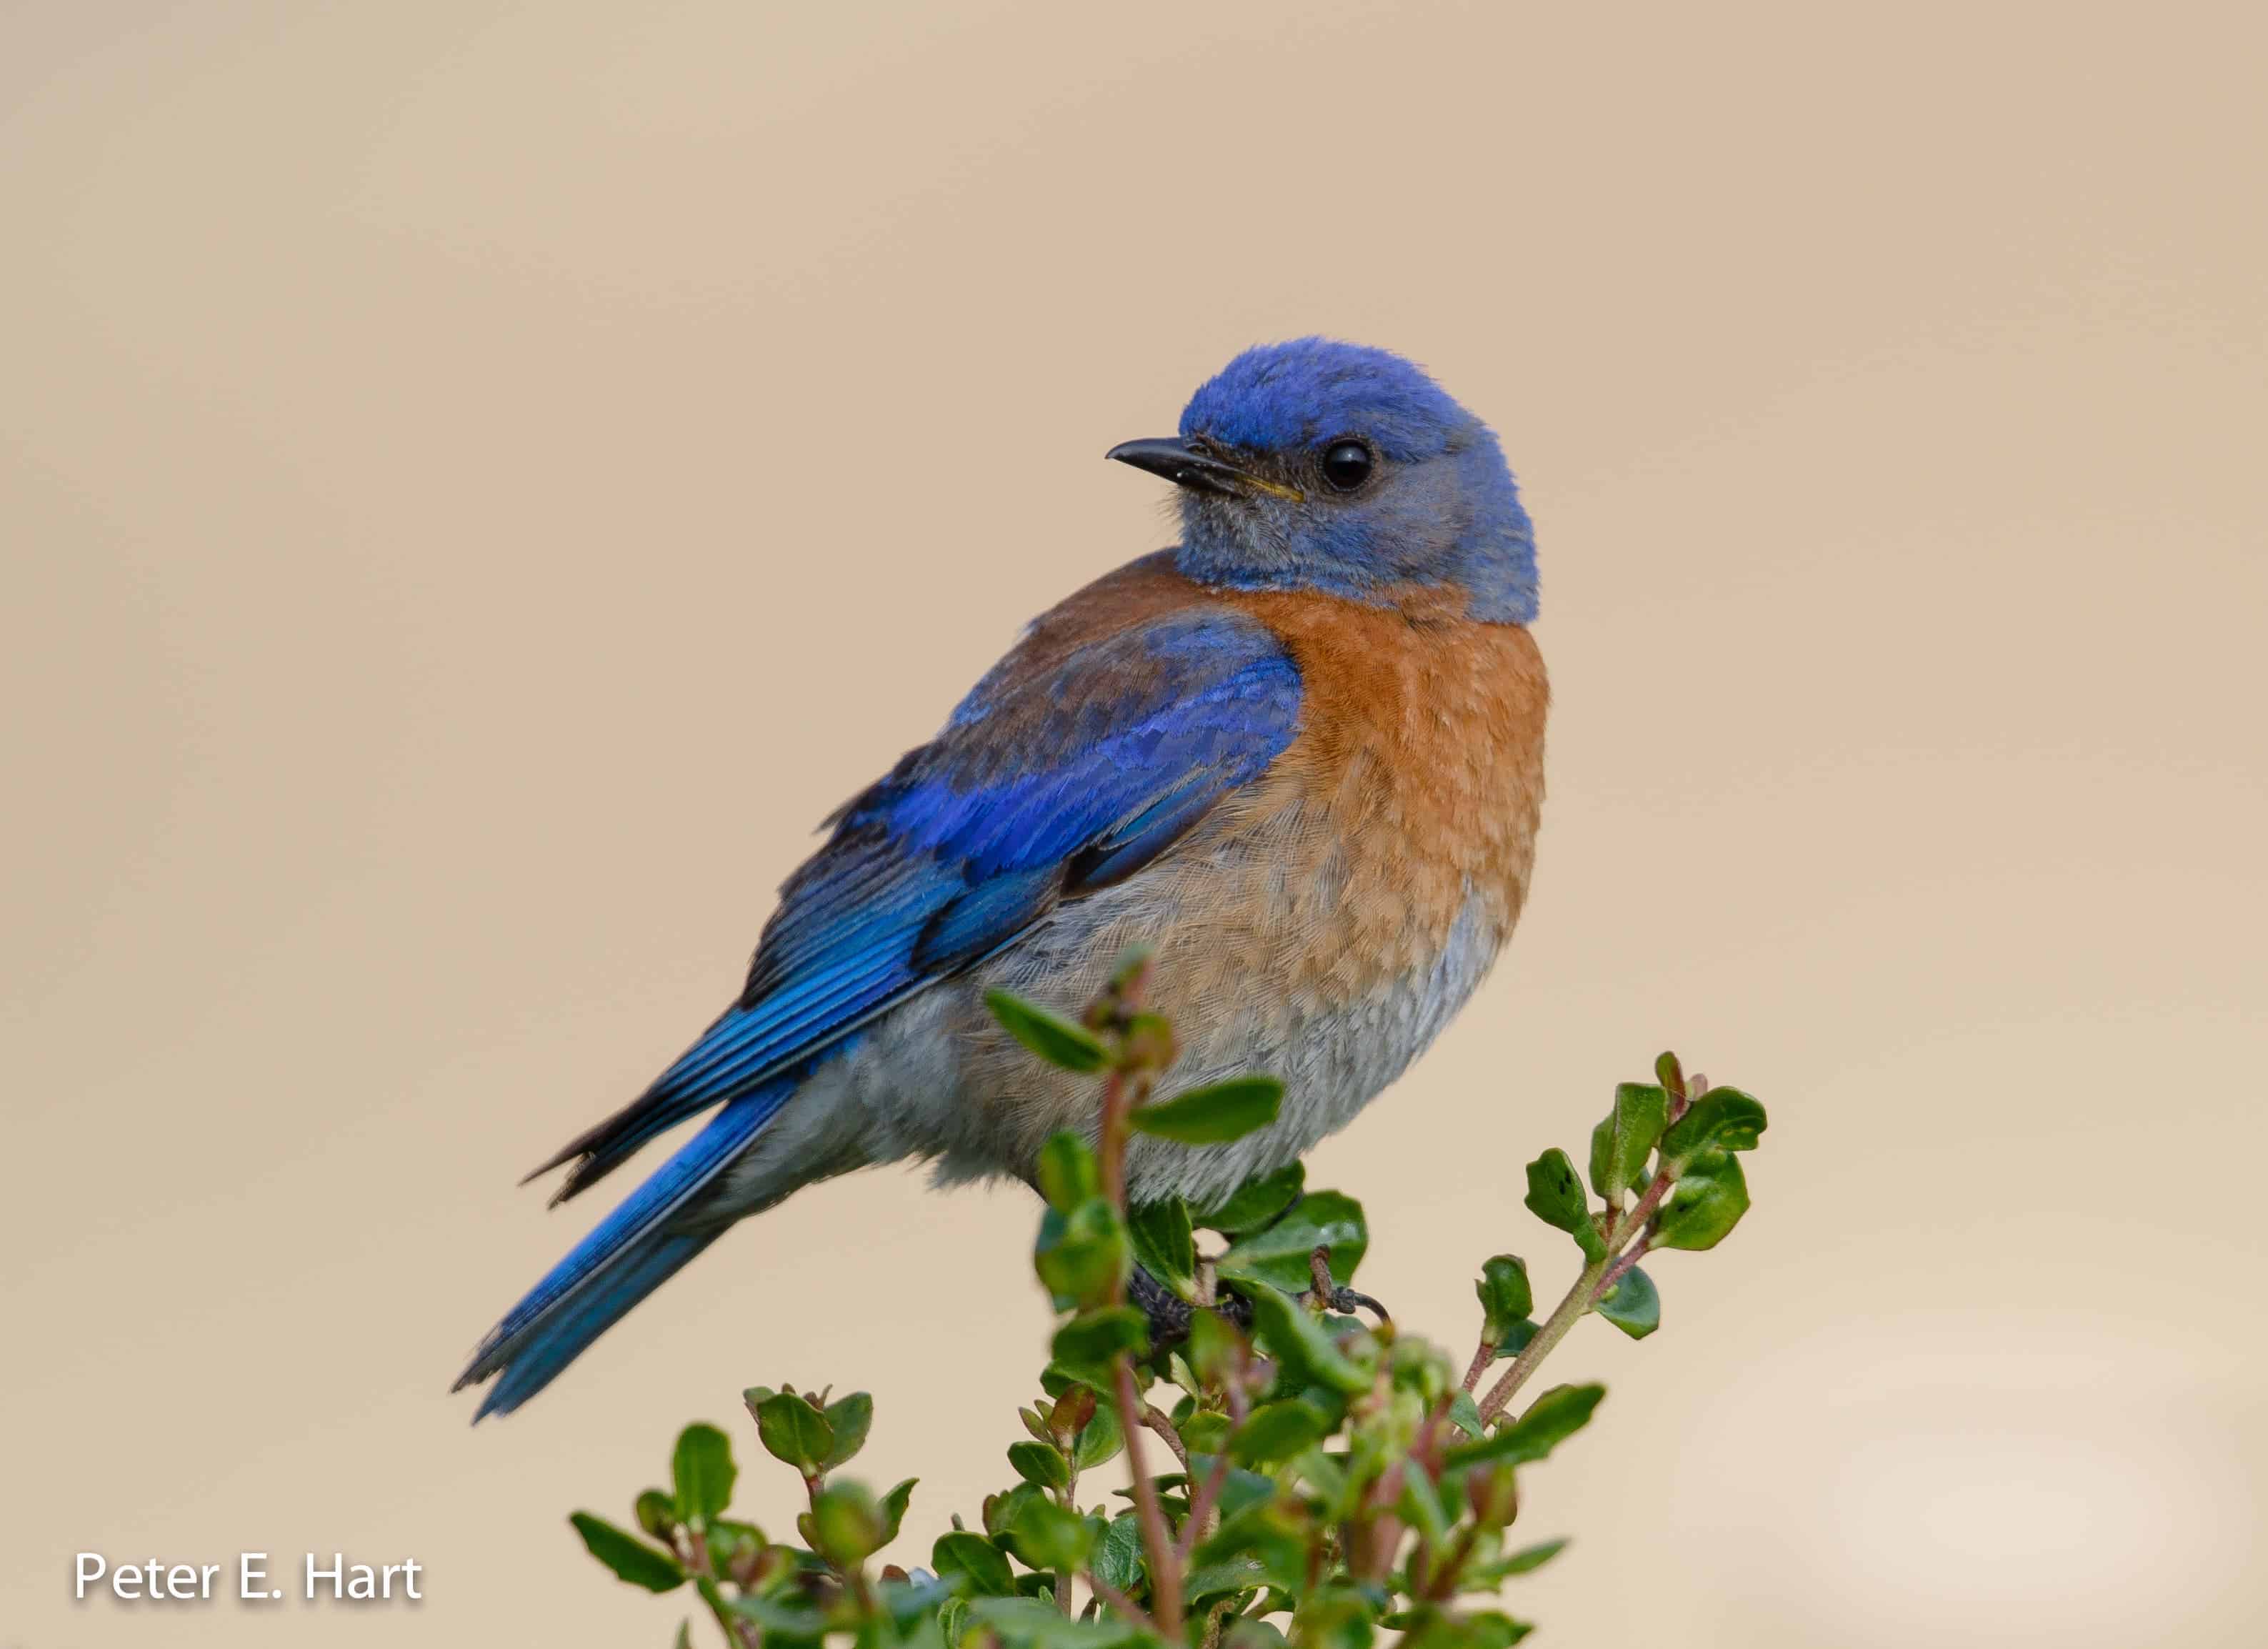 Western Bluebirds lay fewer eggs and hatch chicks with smaller bodies around noisy anthropogenic areas. Credit: Wikimedia Commons.